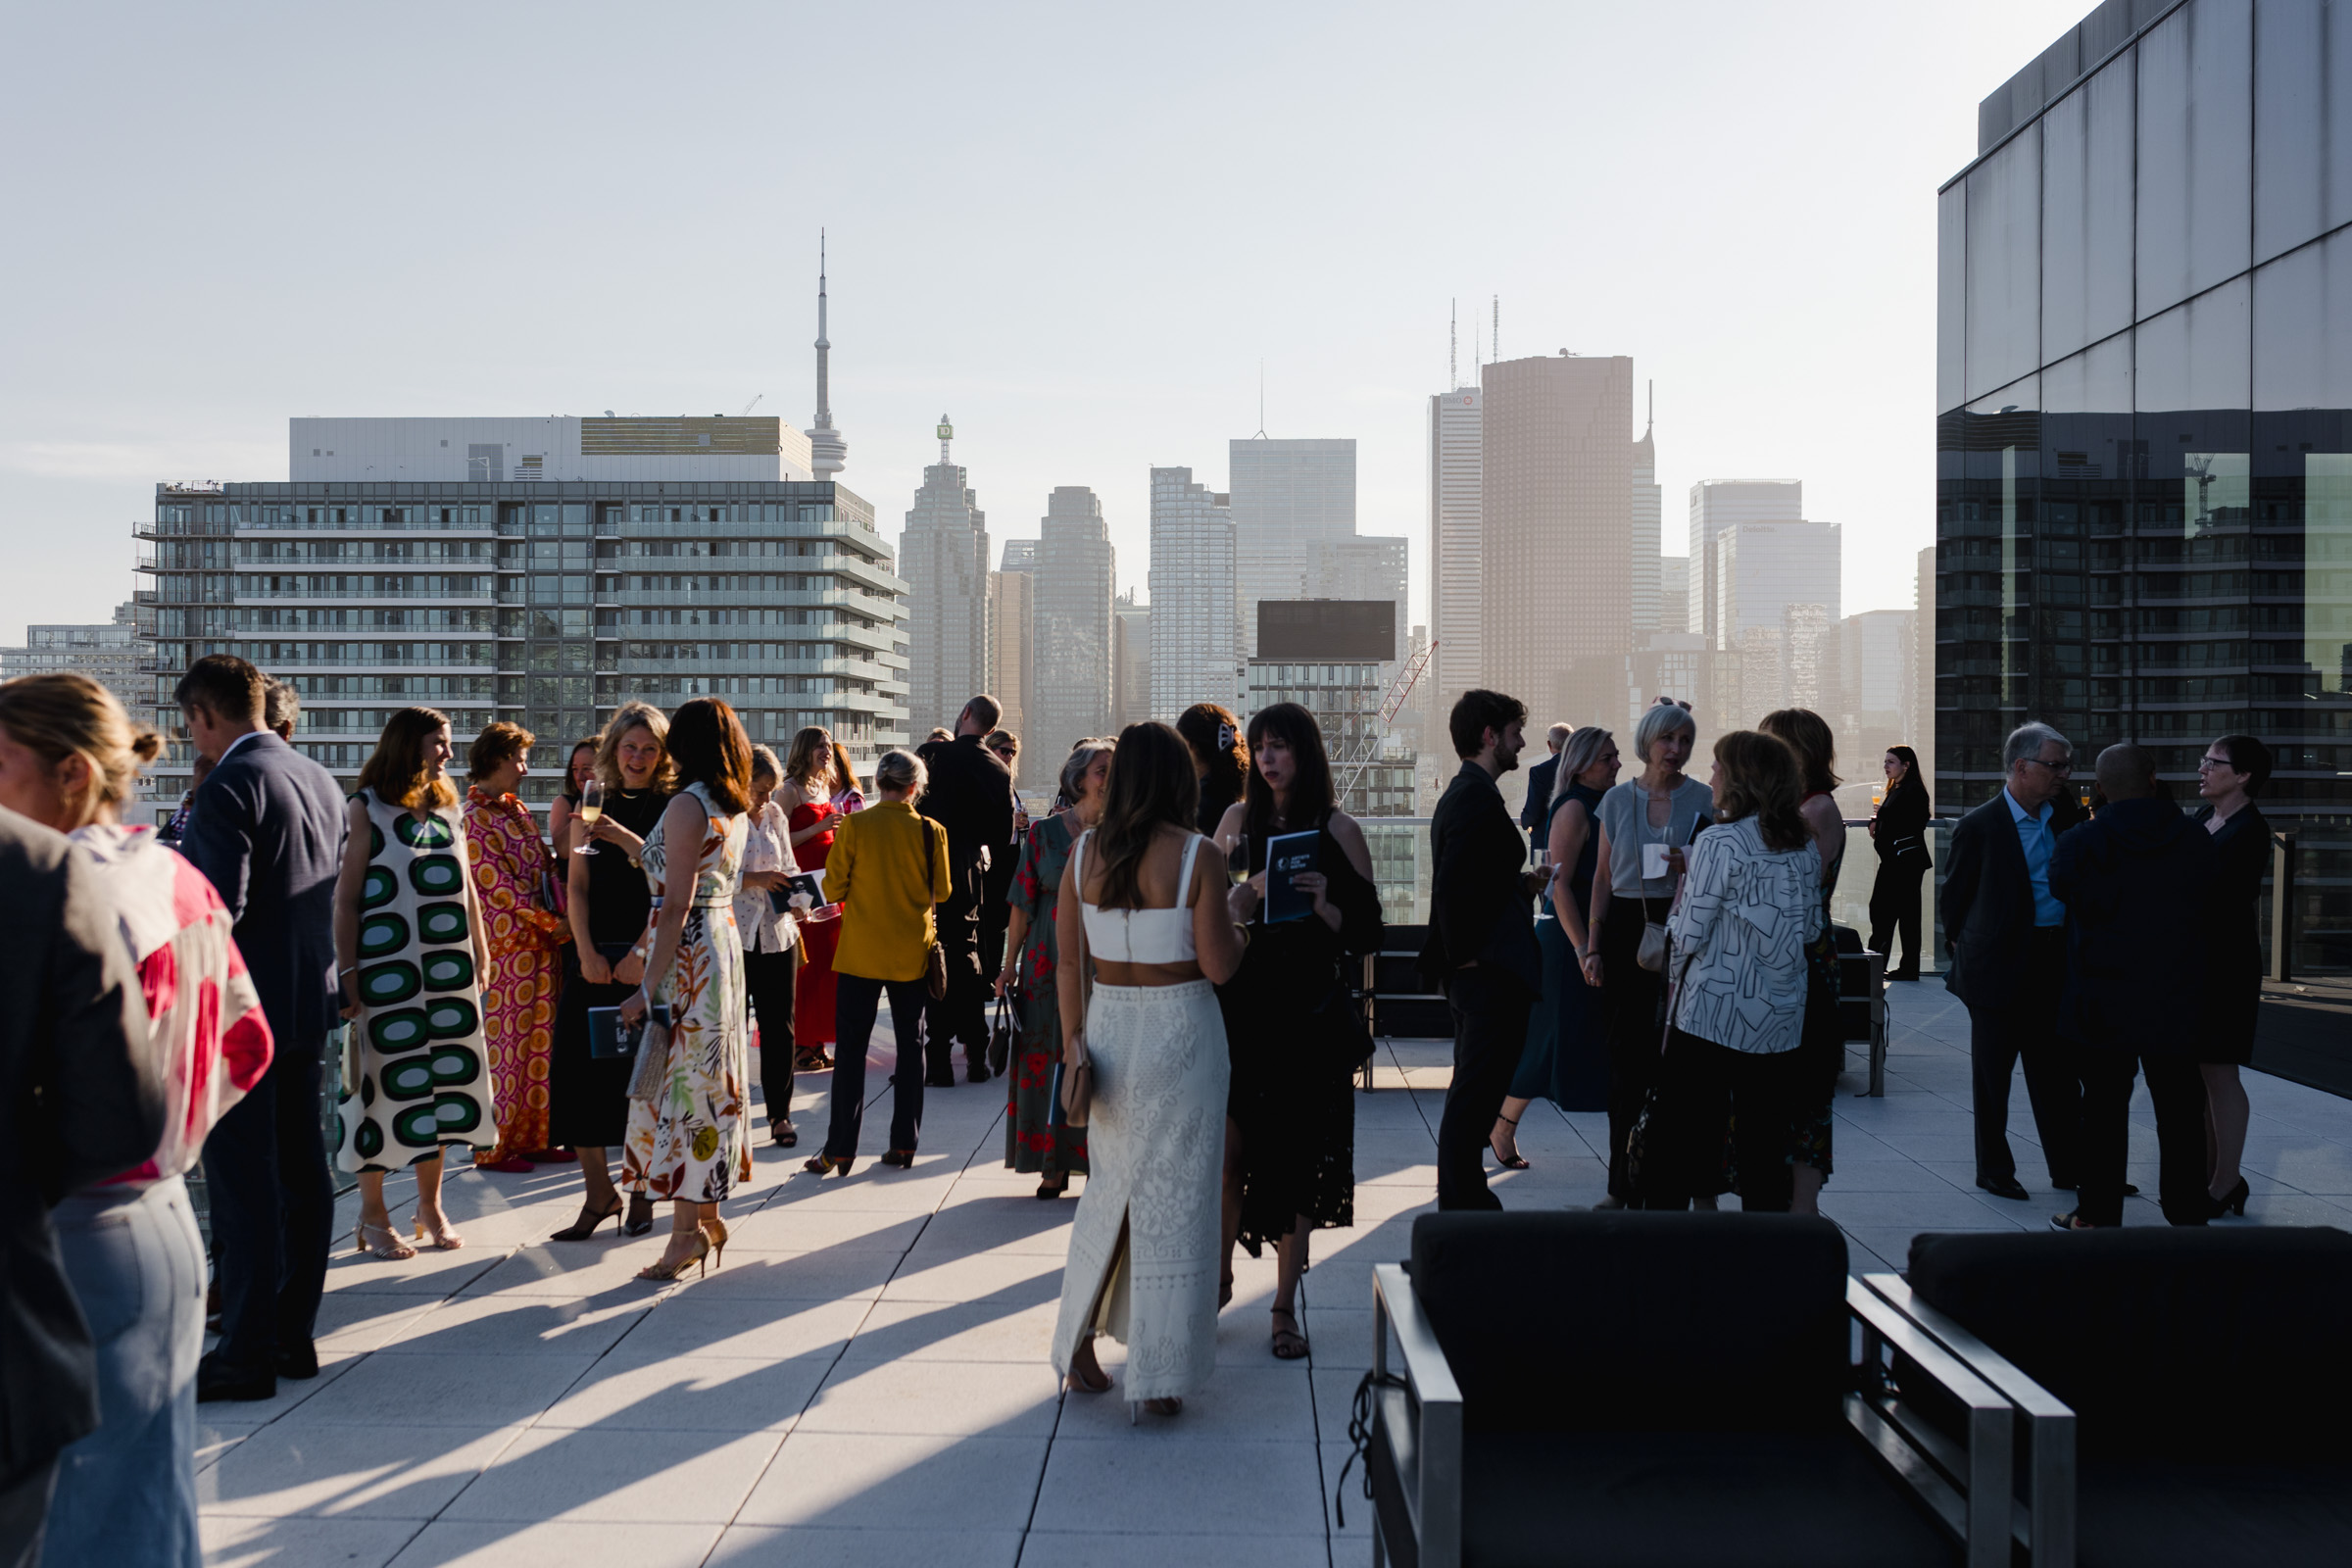 A group of people socializing on a rooftop terrace with a city skyline in the background, under clear skies during daylight, makes for perfect event photography.